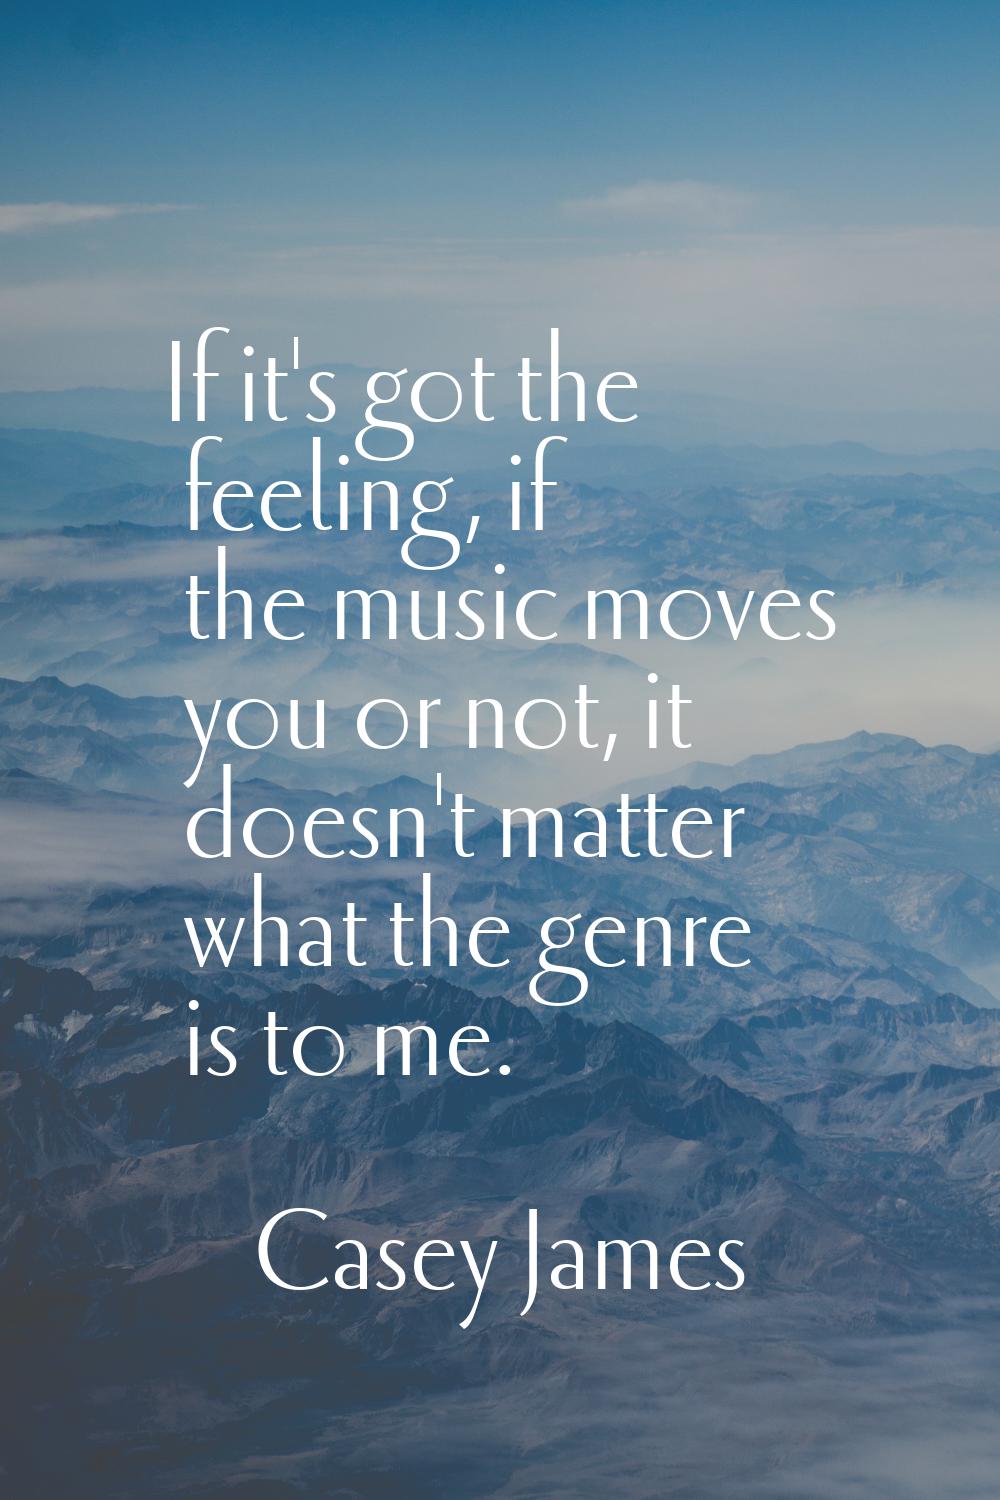 If it's got the feeling, if the music moves you or not, it doesn't matter what the genre is to me.